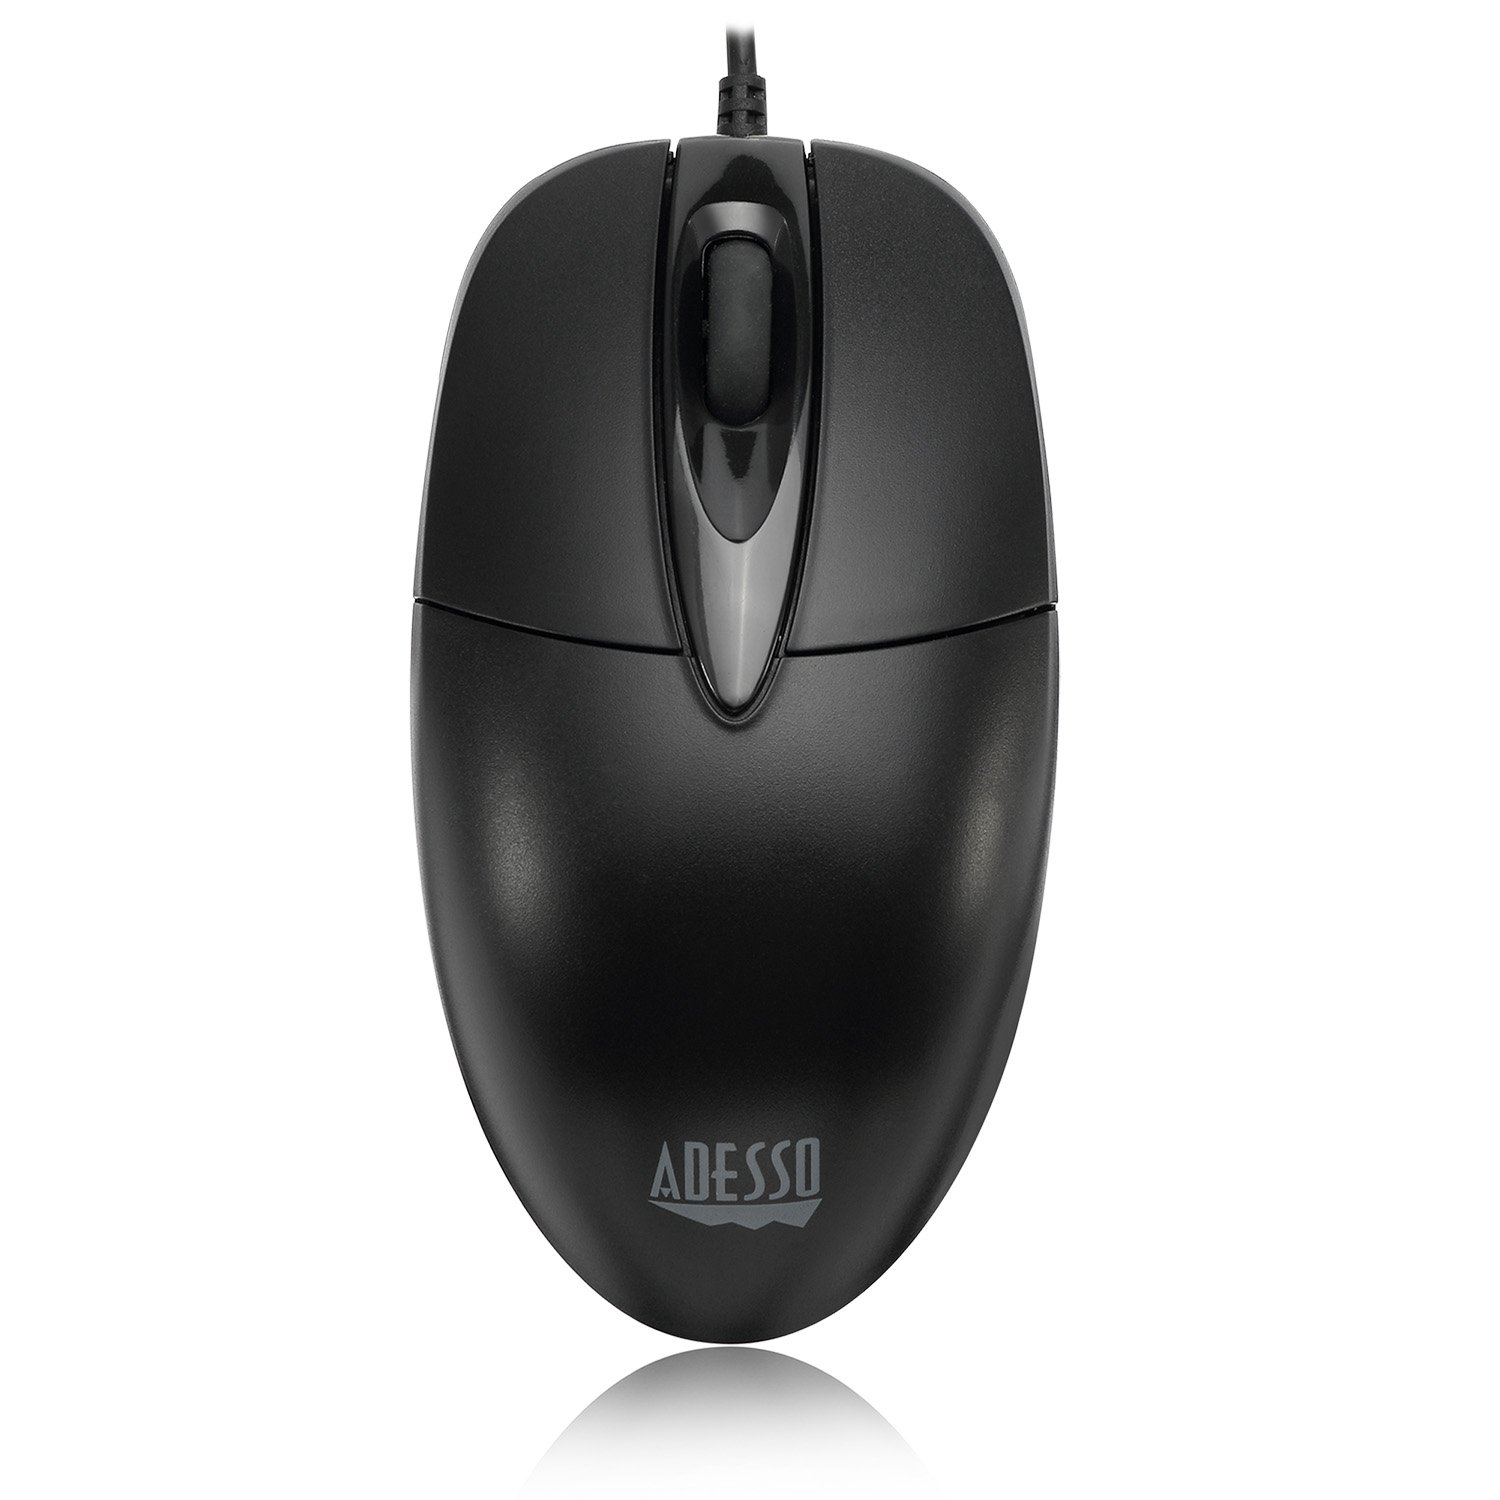 DESKTOP FULL SIZE MOUSE - WIRED